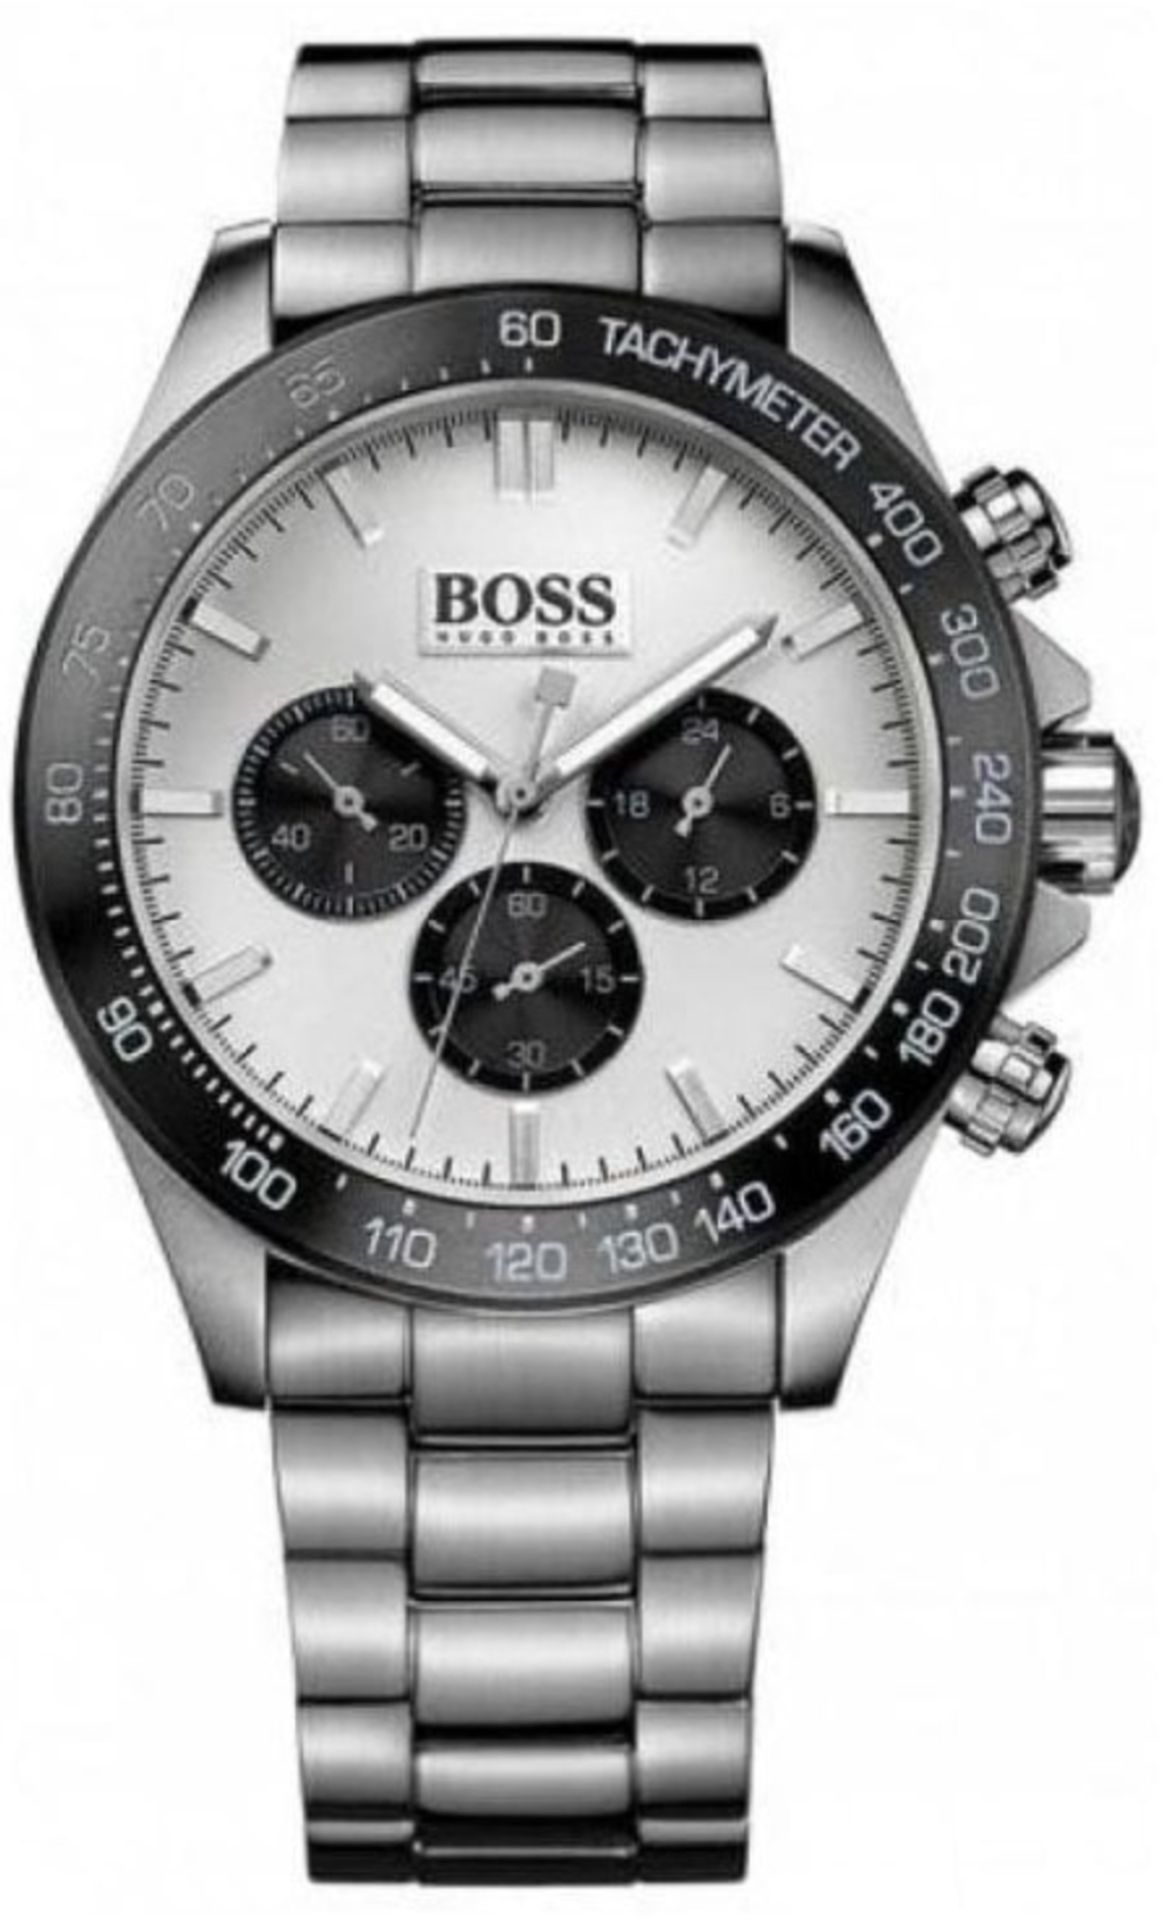 Hugo Boss Trade Lot 1C. A Total Of 20 Brand New Hugo Boss Watches - Image 16 of 20